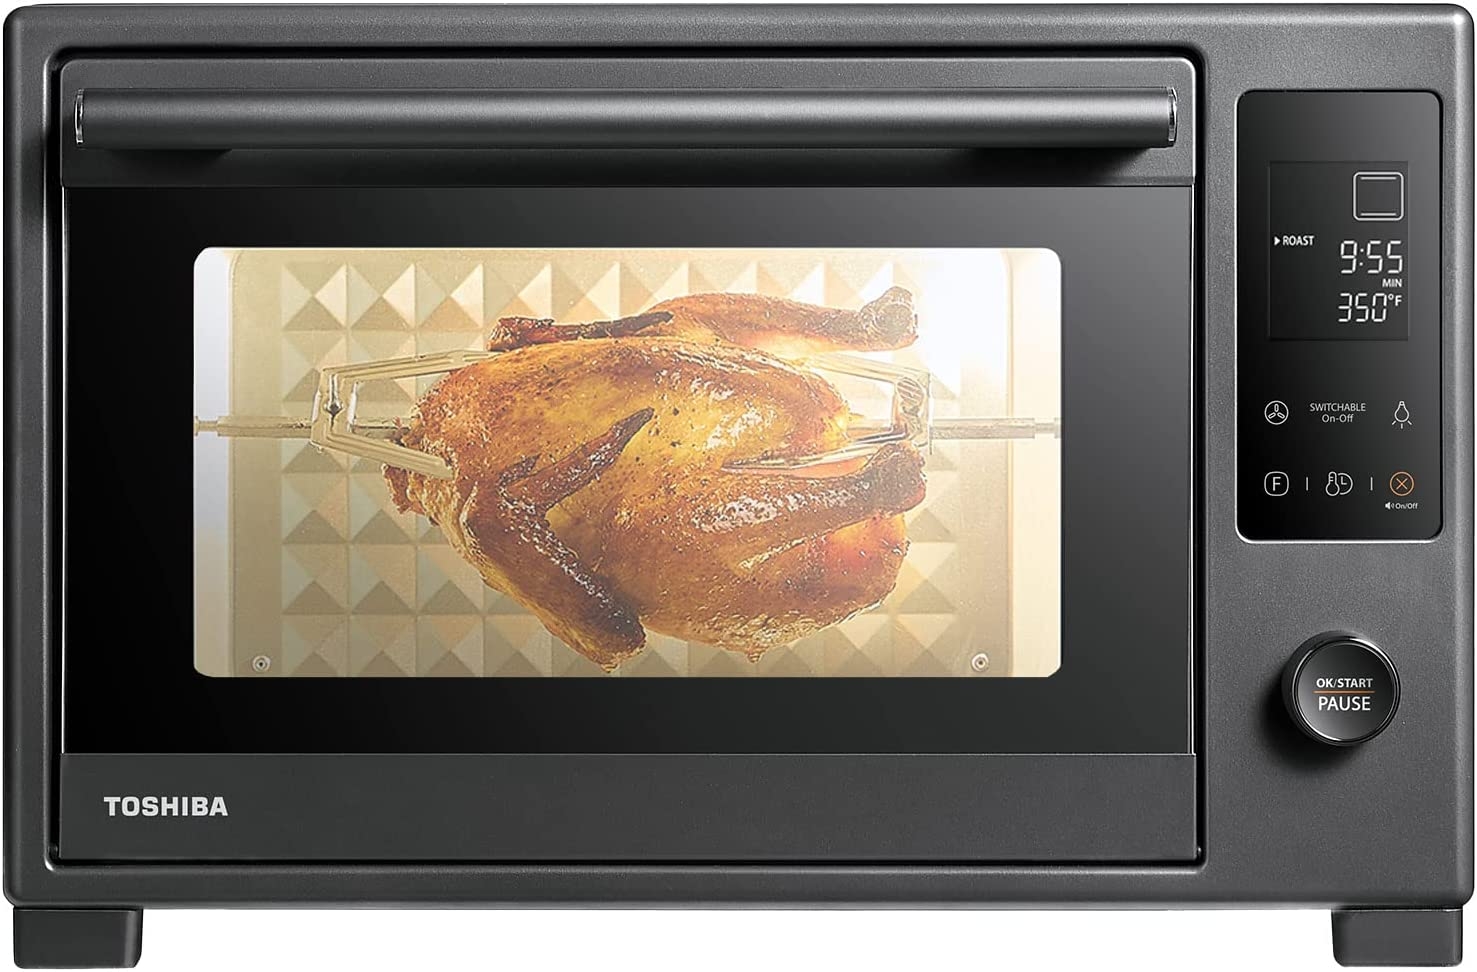 TOSHIBA Hot Air Convection Toaster Oven, Extra Large 34QT/32L, 9-in-1 Cooking Functions, Crispy Grill, Dehydrate, Rotisserie, 6